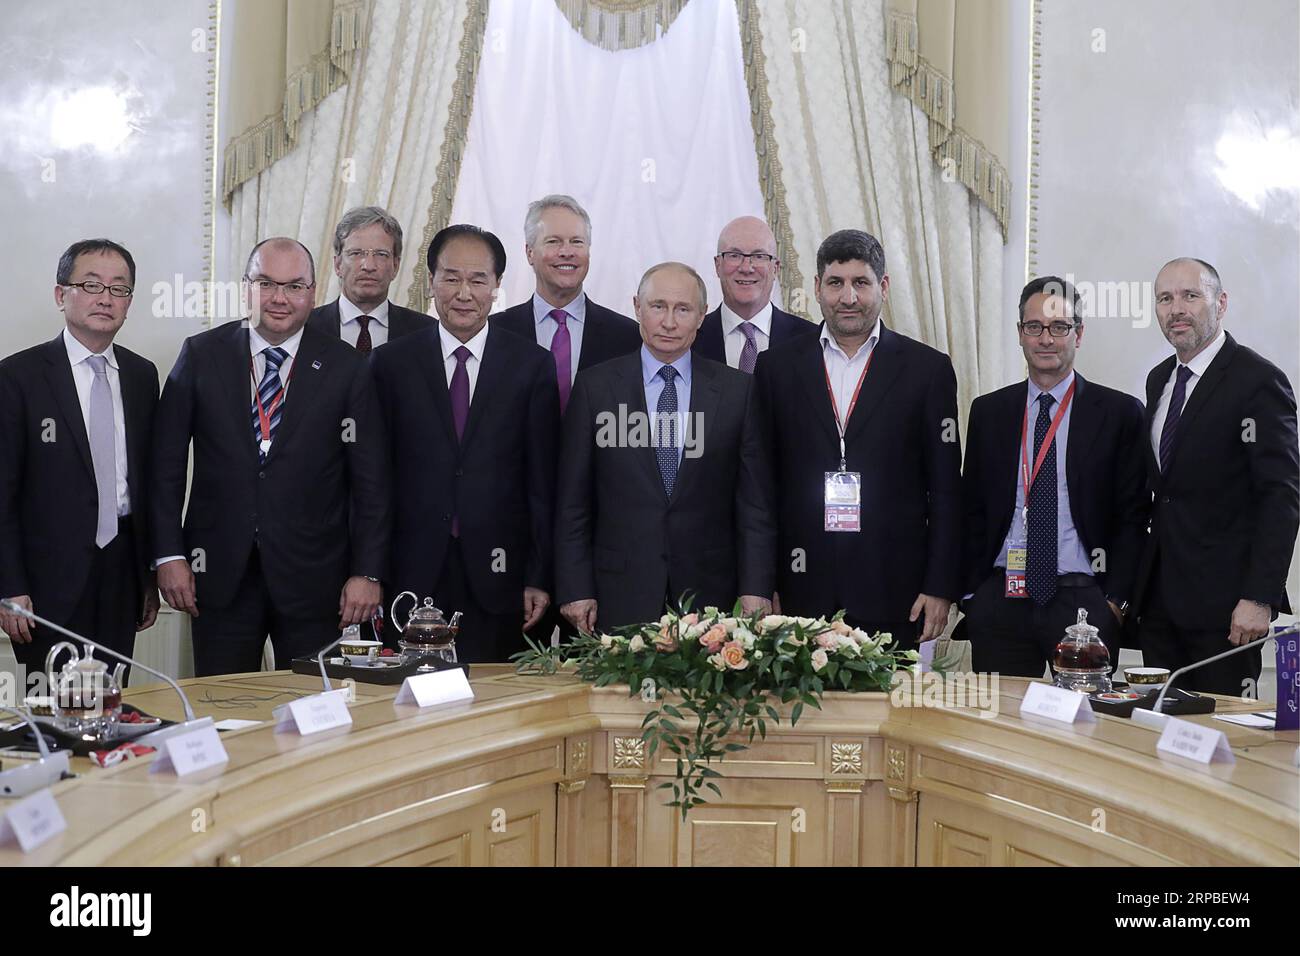 (190607) -- ST. PETERSBURG, June 7, 2019 -- Russian President Vladimir Putin (5th R) takes group photo with President of China s Xinhua News Agency Cai Mingzhao (4th L) and other heads of news agencies in St. Petersburg, Russia, June 6, 2019. The Russian economy has entered a trajectory of sustainable growth as a result of an improving economic environment and the implementation of strategic national projects, Russian President Vladimir Putin said Thursday. We have not only overcome the decline, but we have stepped on a trajectory of sustainable growth, he said on the sidelines of the 23rd St. Stock Photo